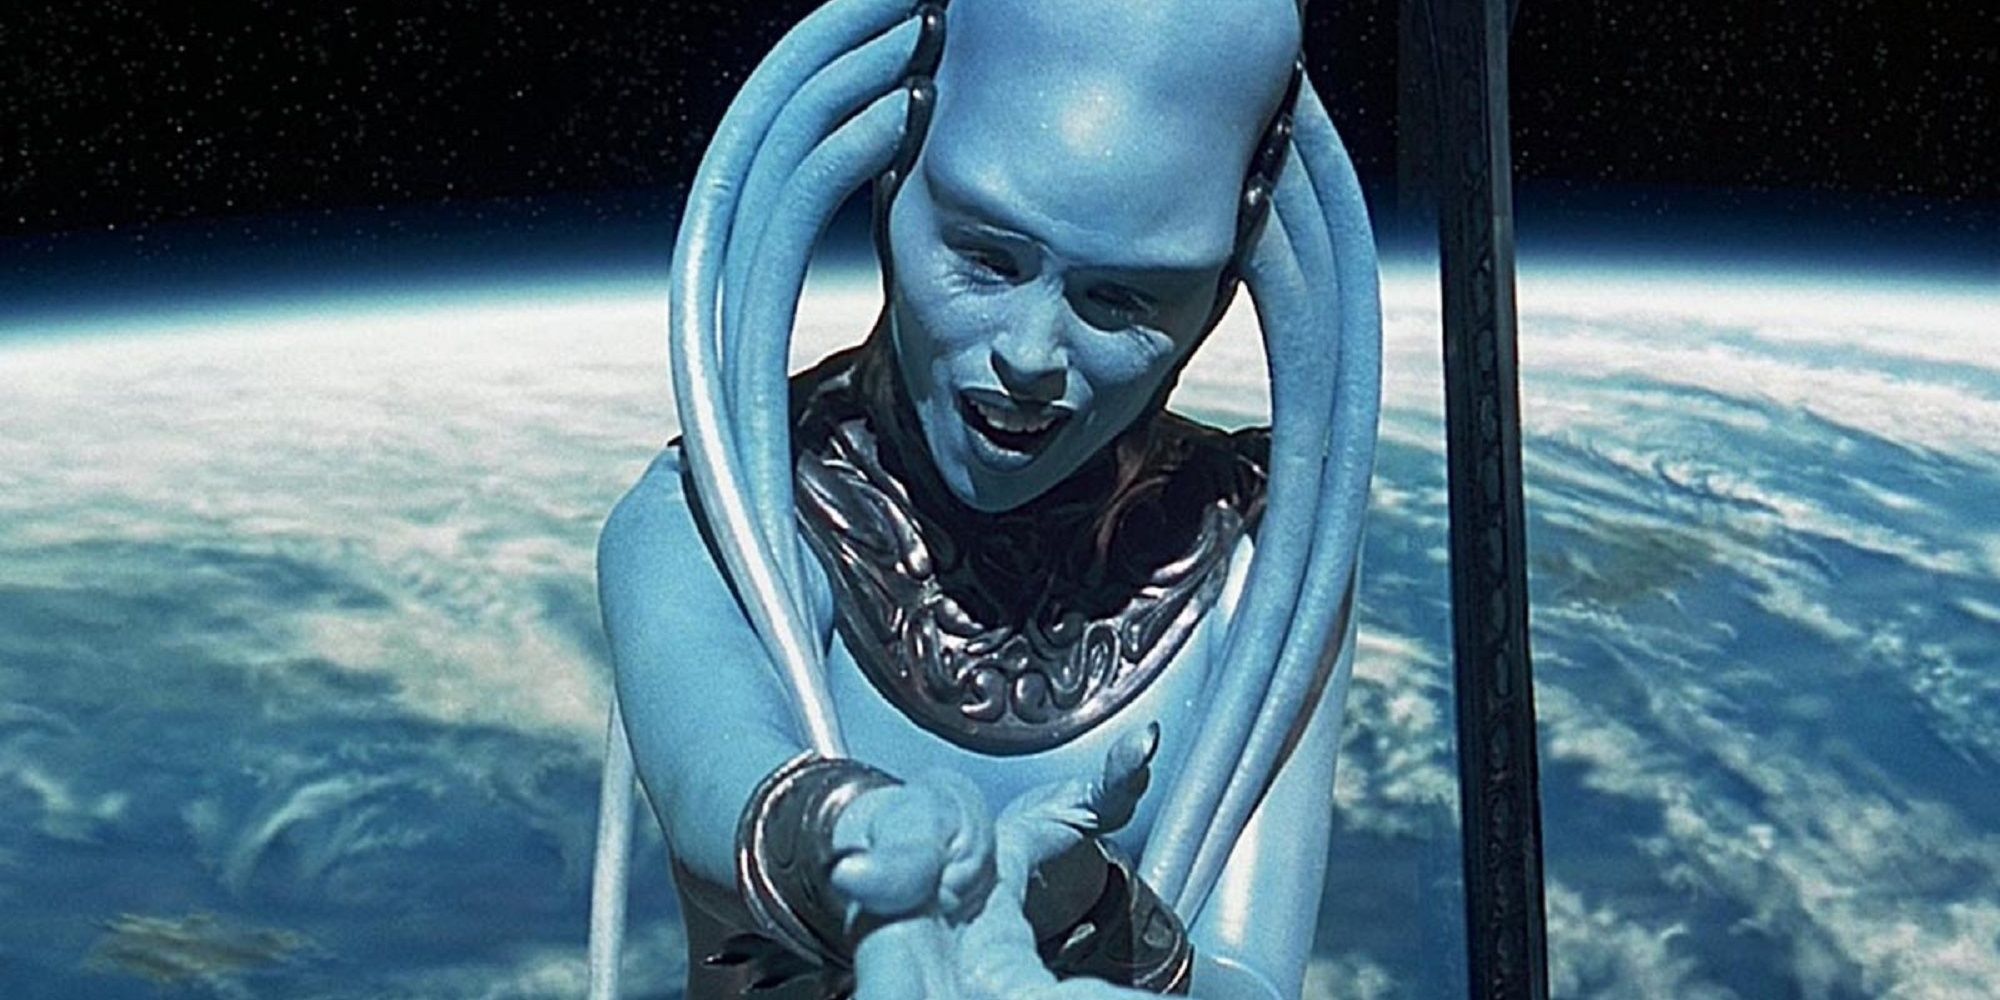 Diva Plavalaguna singing at her opera in The Fifth Element.